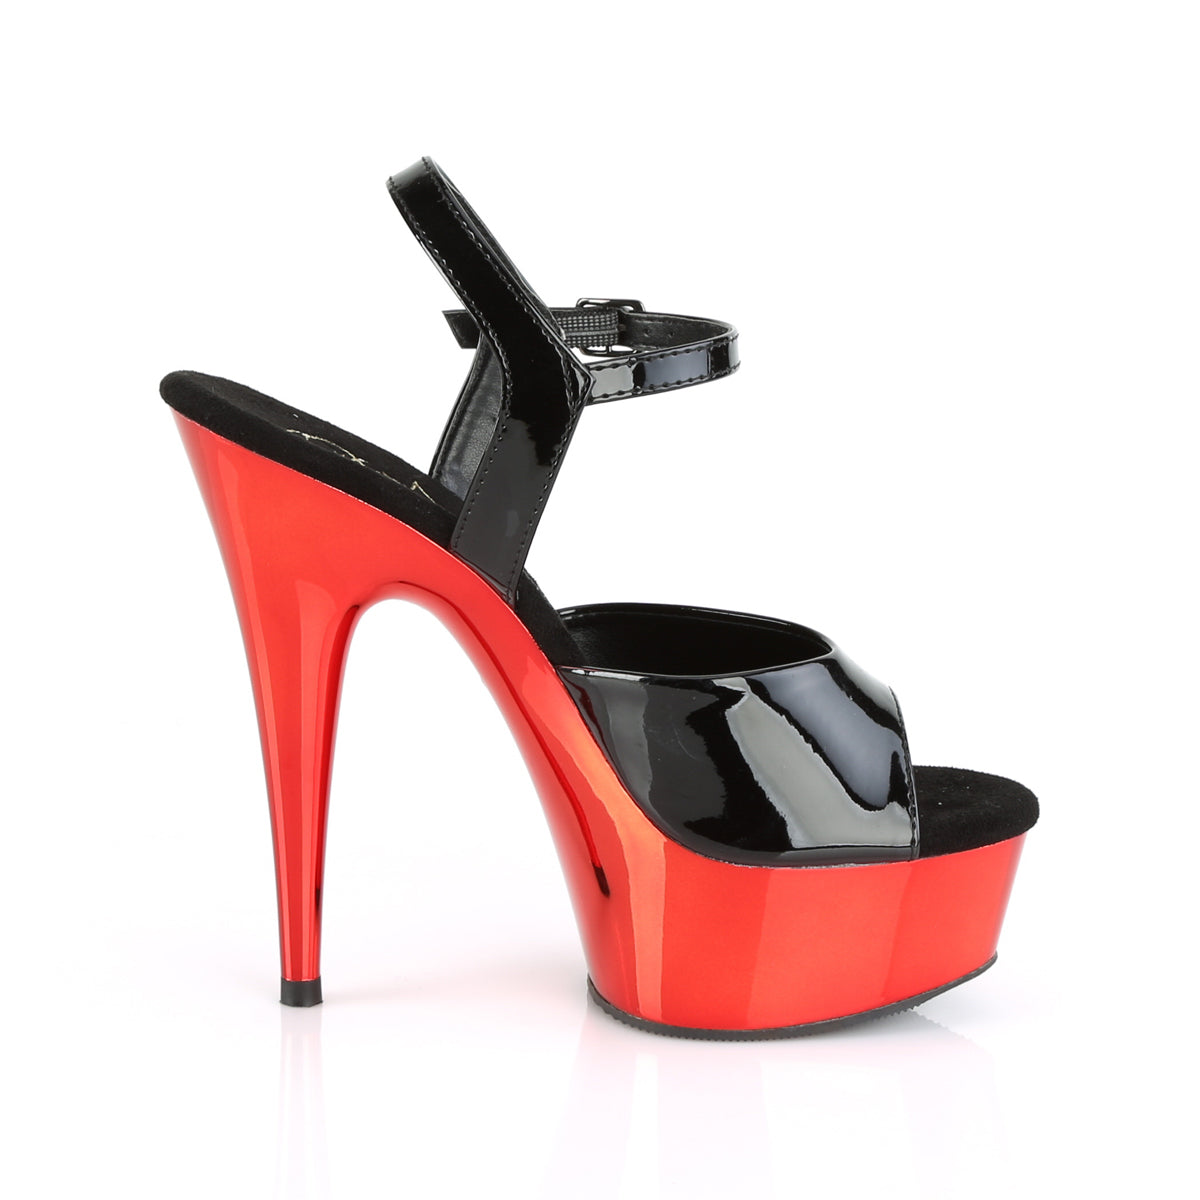 DELIGHT-609 6" Black with Red Chrome Pole Dancer Platforms-Pleaser- Sexy Shoes Fetish Heels